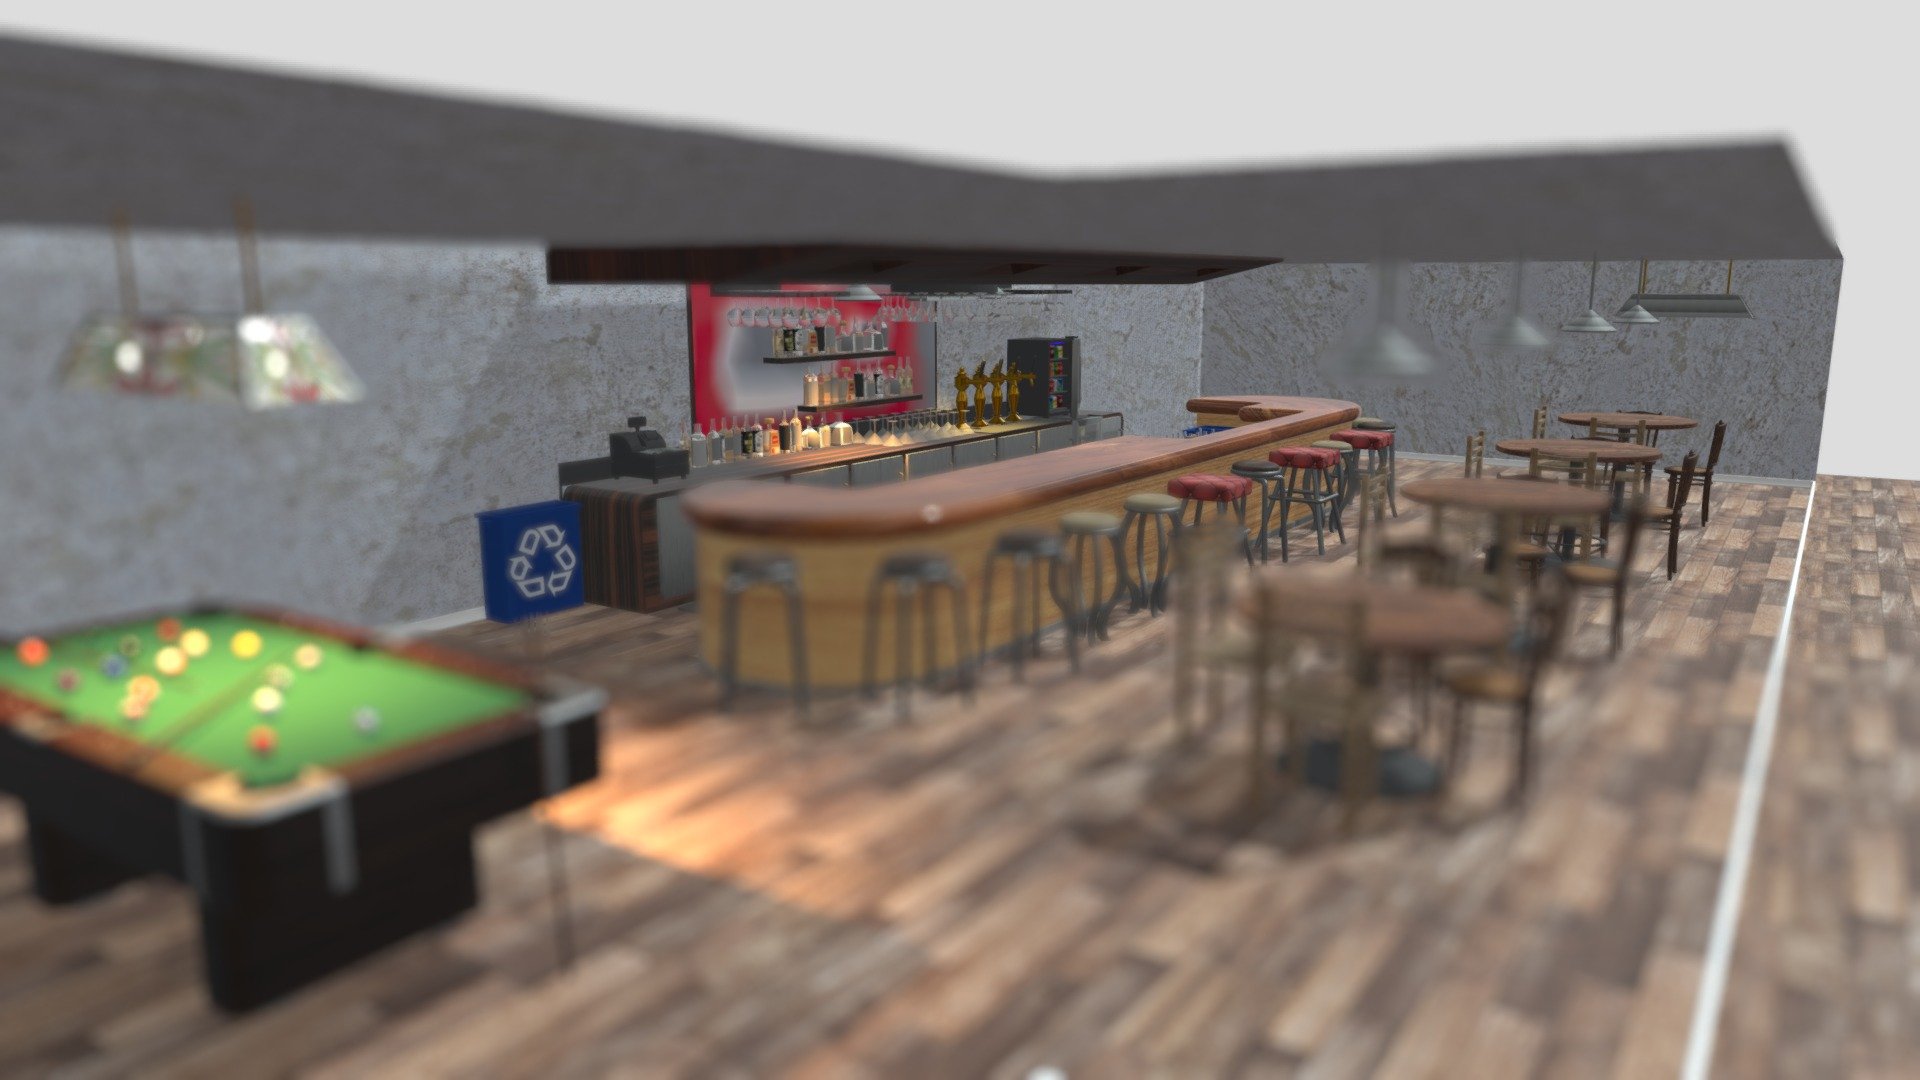 This is a scene I made in Atodesk Maya. 
This first inspiration was the Alibi Room from Shameless, it end up being the scene you're looking at.
This is my last scene of the year, I really hope you like it :)

CC:
Register by: Numiteg. https://sketchfab.com/3d-models/cash-register-by-numiteg-93e2d04acb5541e1a12a181f8b1addc4 
Chair by: shuvalov.di. https://sketchfab.com/3d-models/chair-c226b9e0cace4a20bf017b7061ada18d - Bar - Cantine 3d model